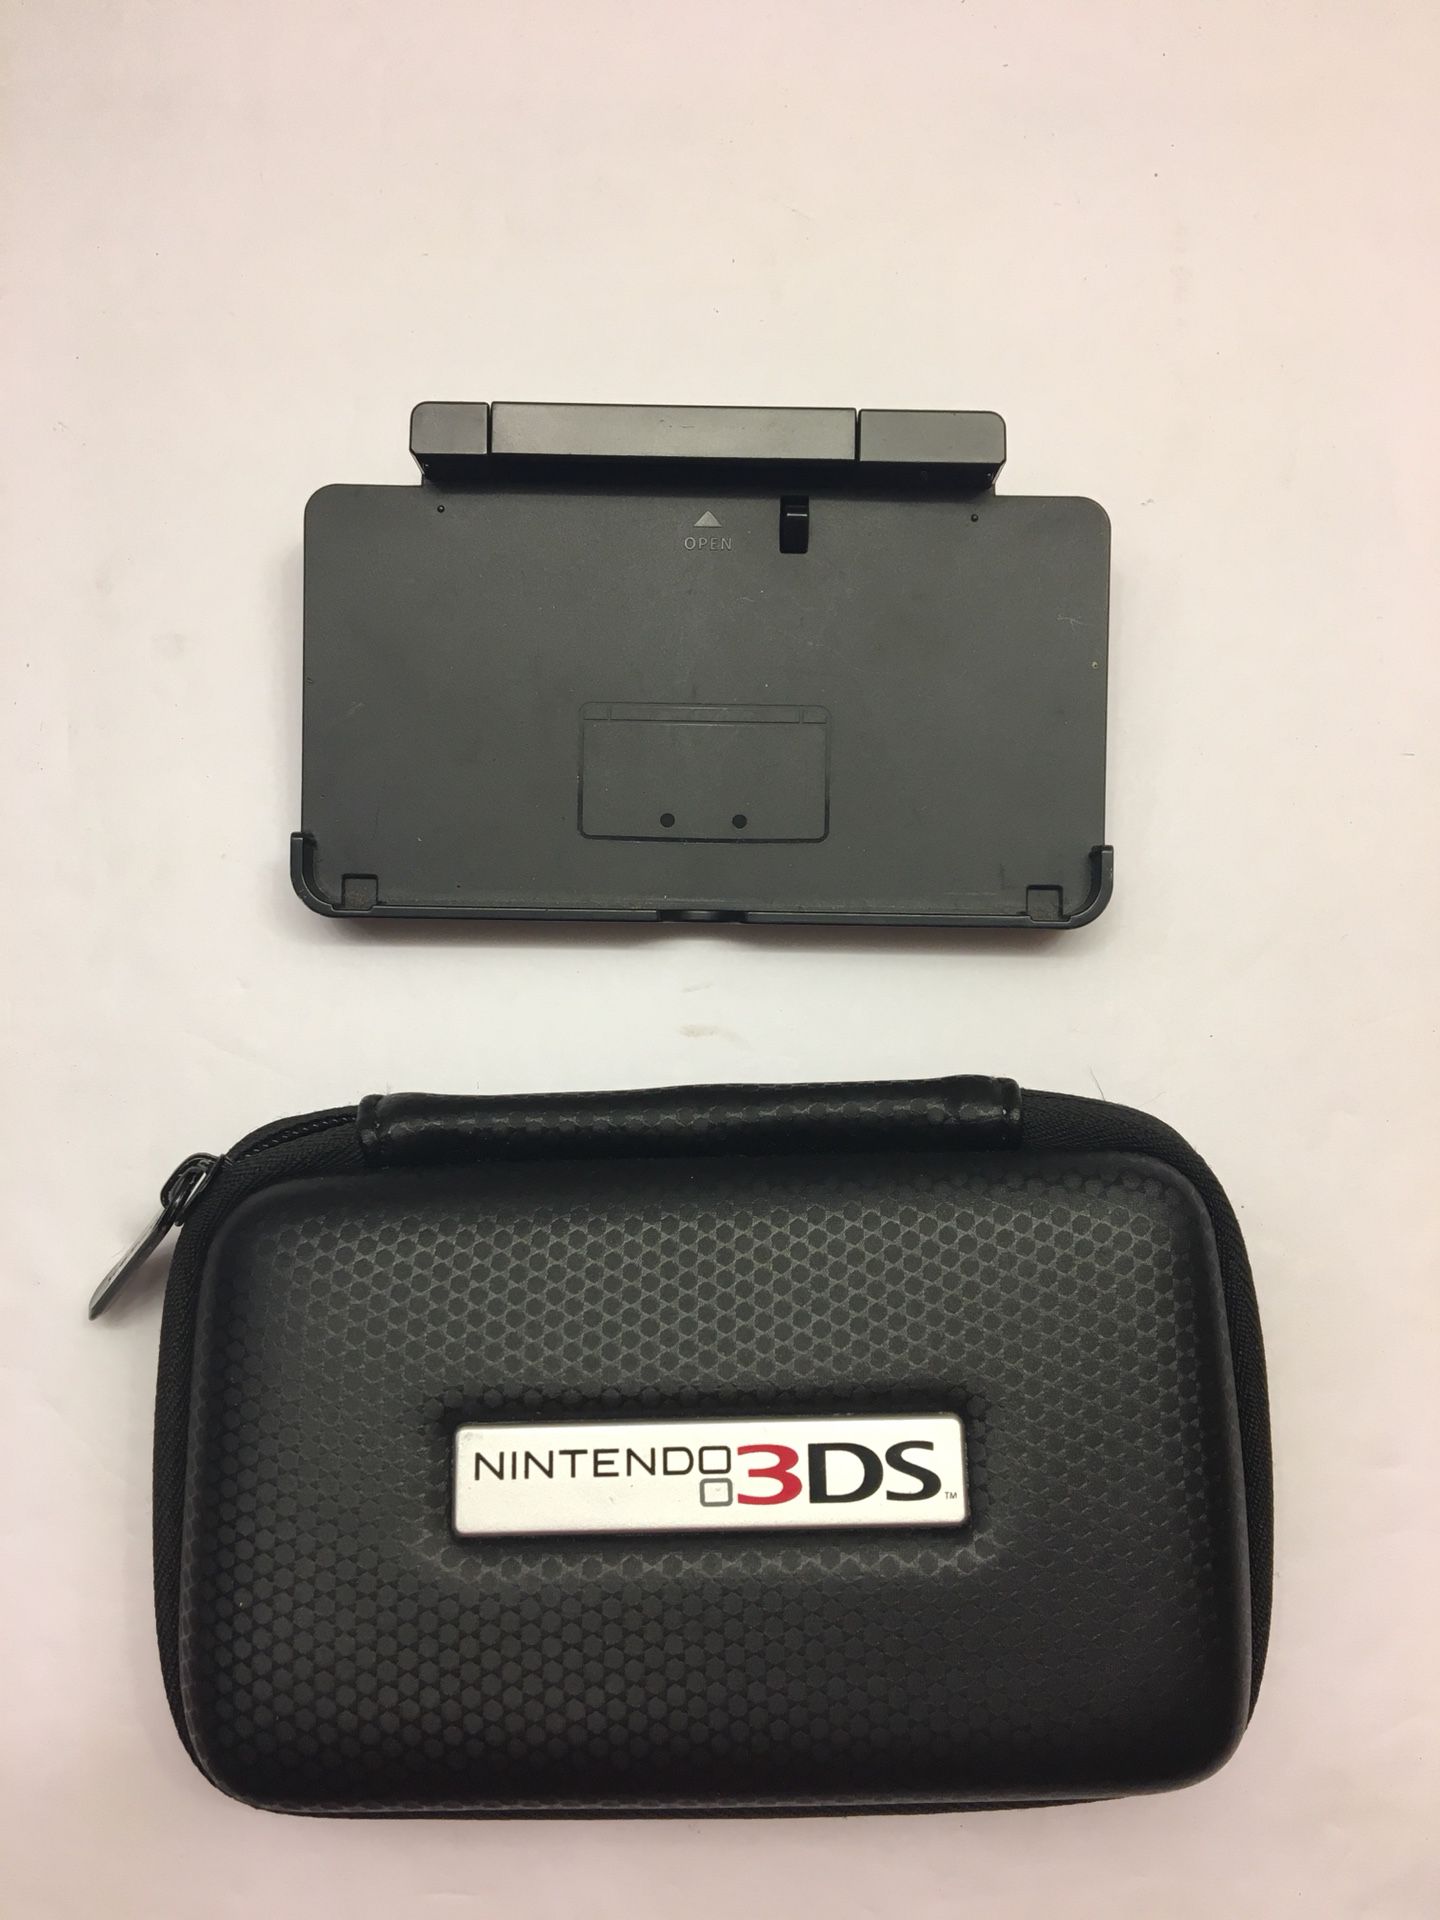 Nintendo 3ds Accessories. Carrying Case. Charging Stand